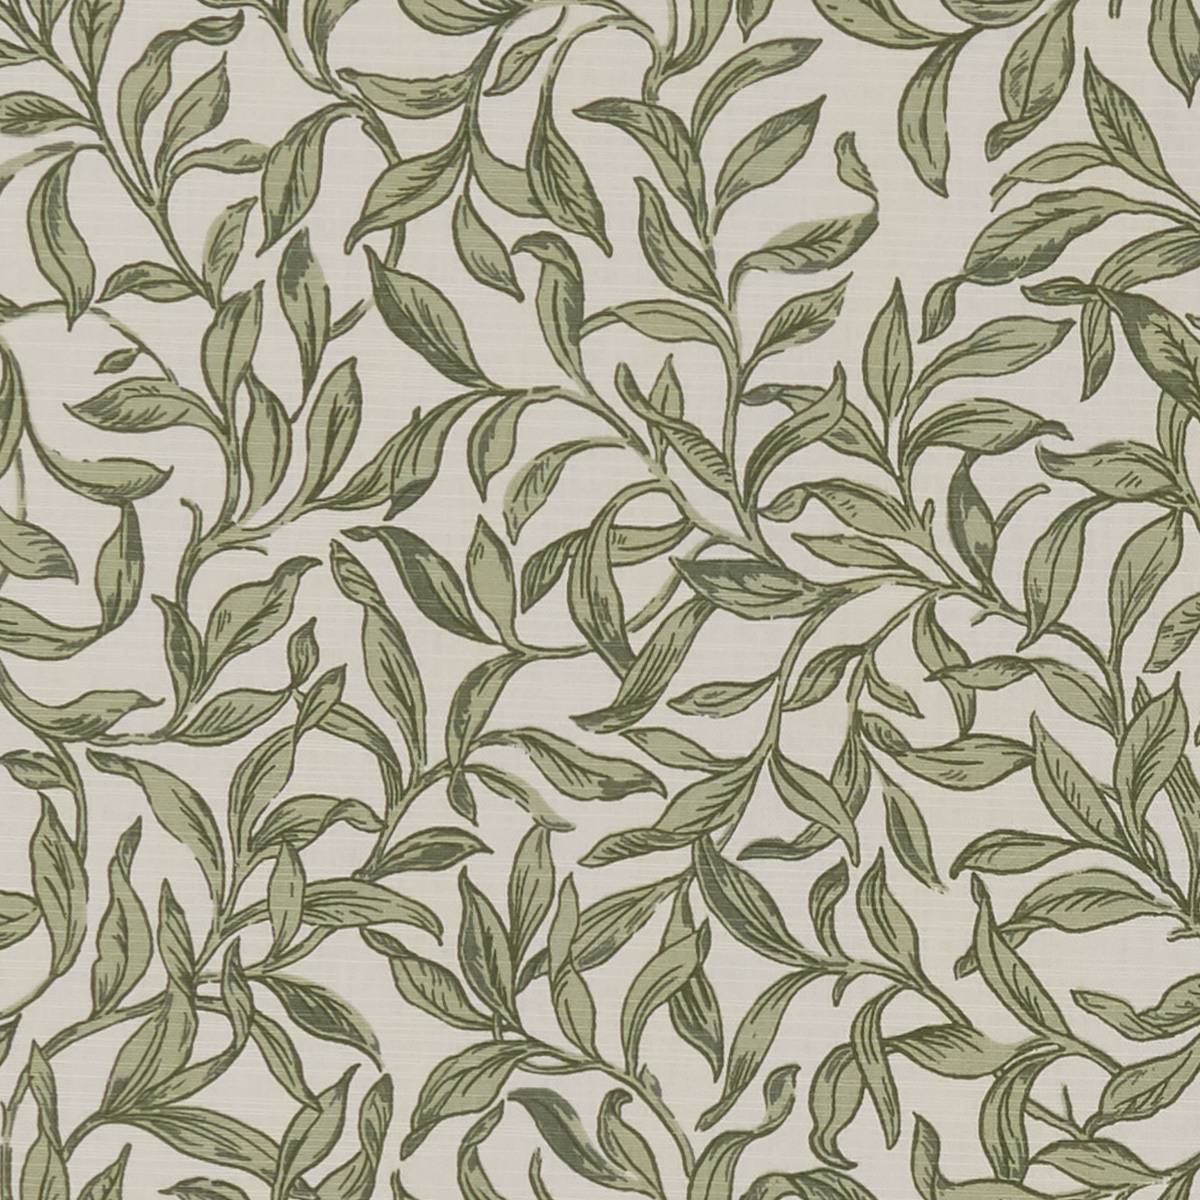 Entwistle Willow Fabric by Studio G